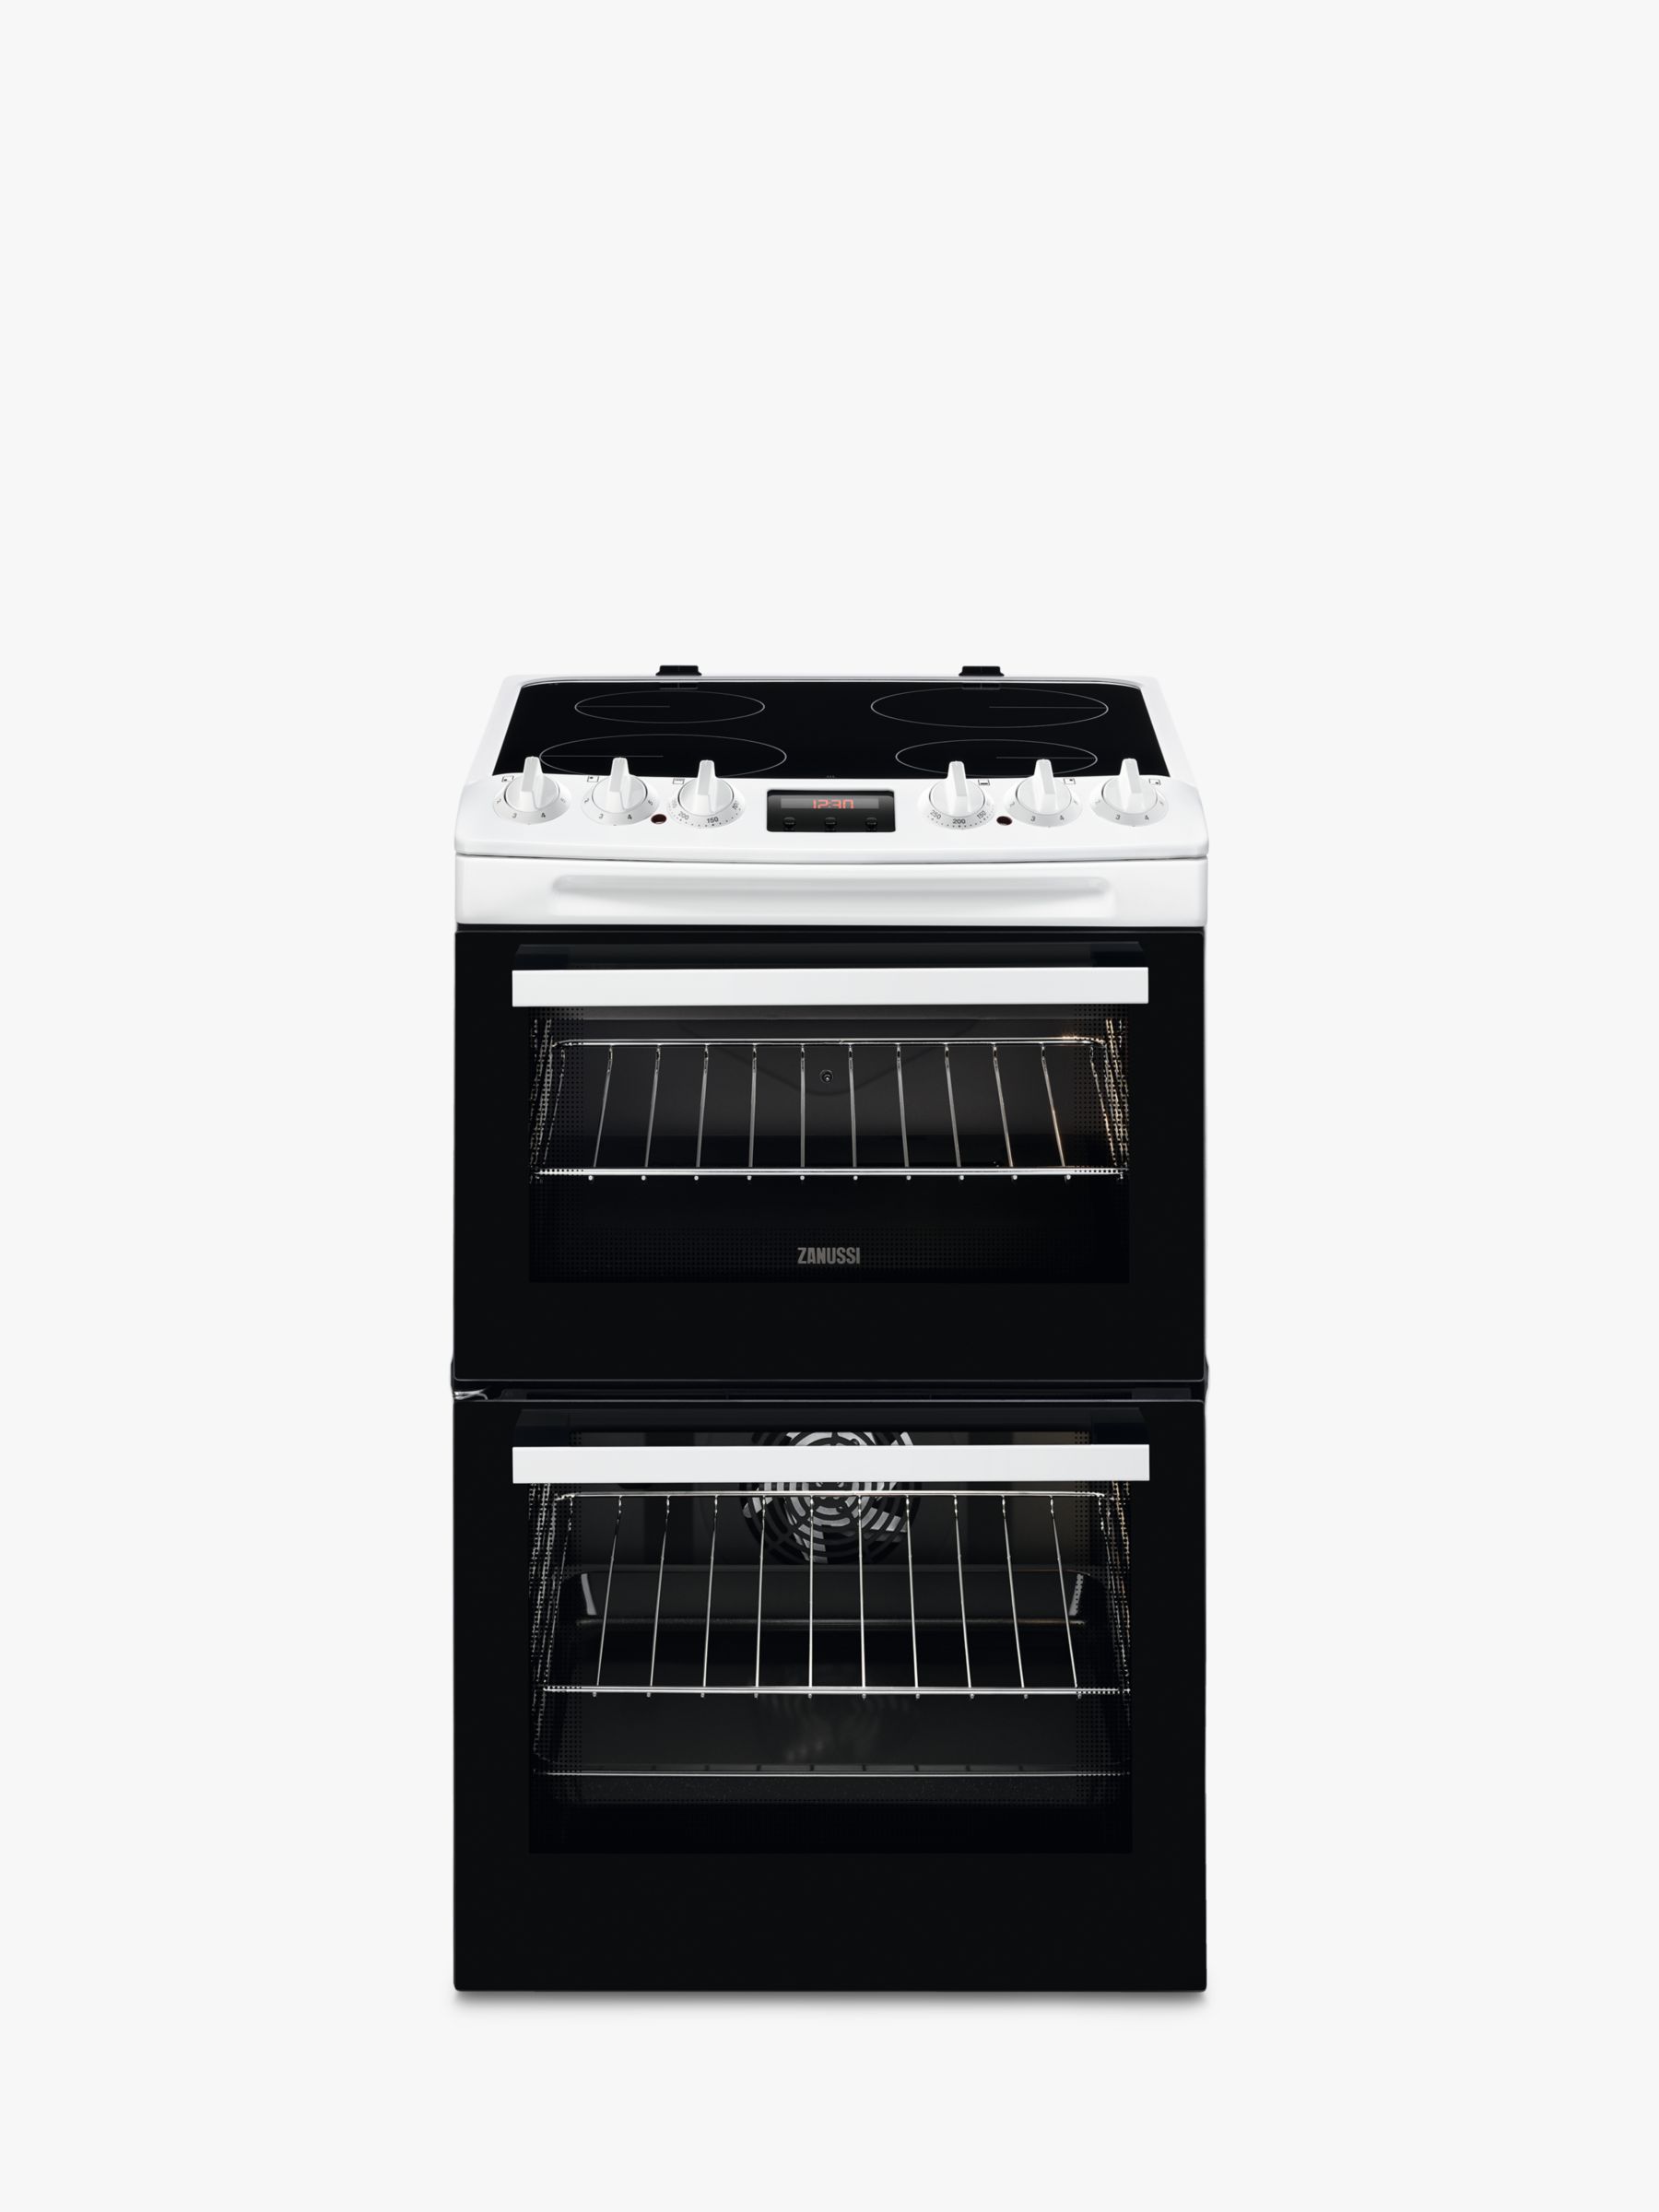 55cm electric cooker white